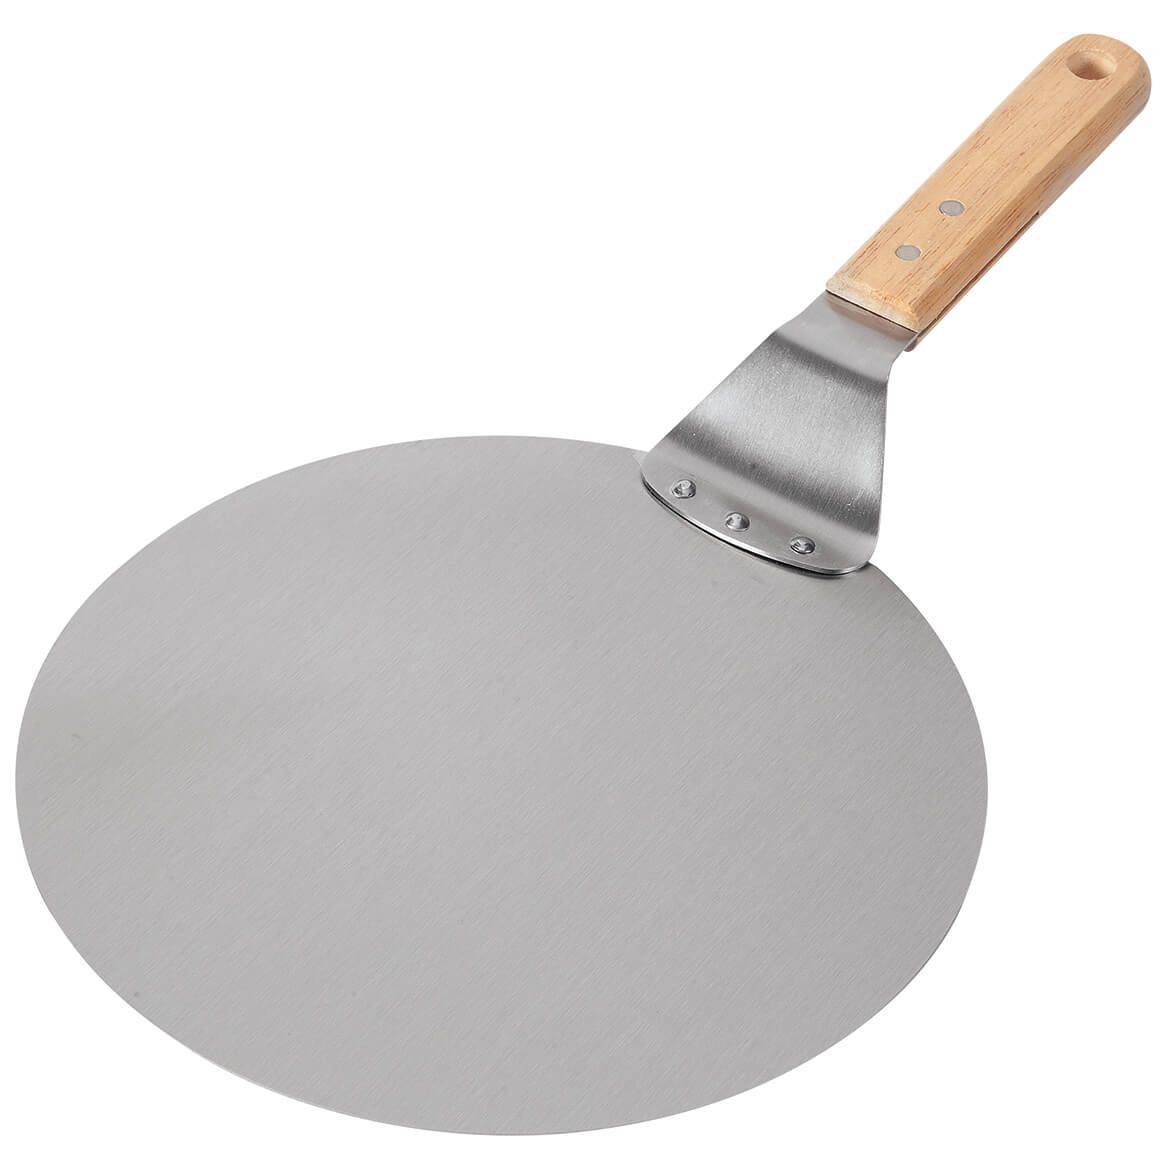 Stainless Steel Pizza Shovel with Wooden Handle + '-' + 376553